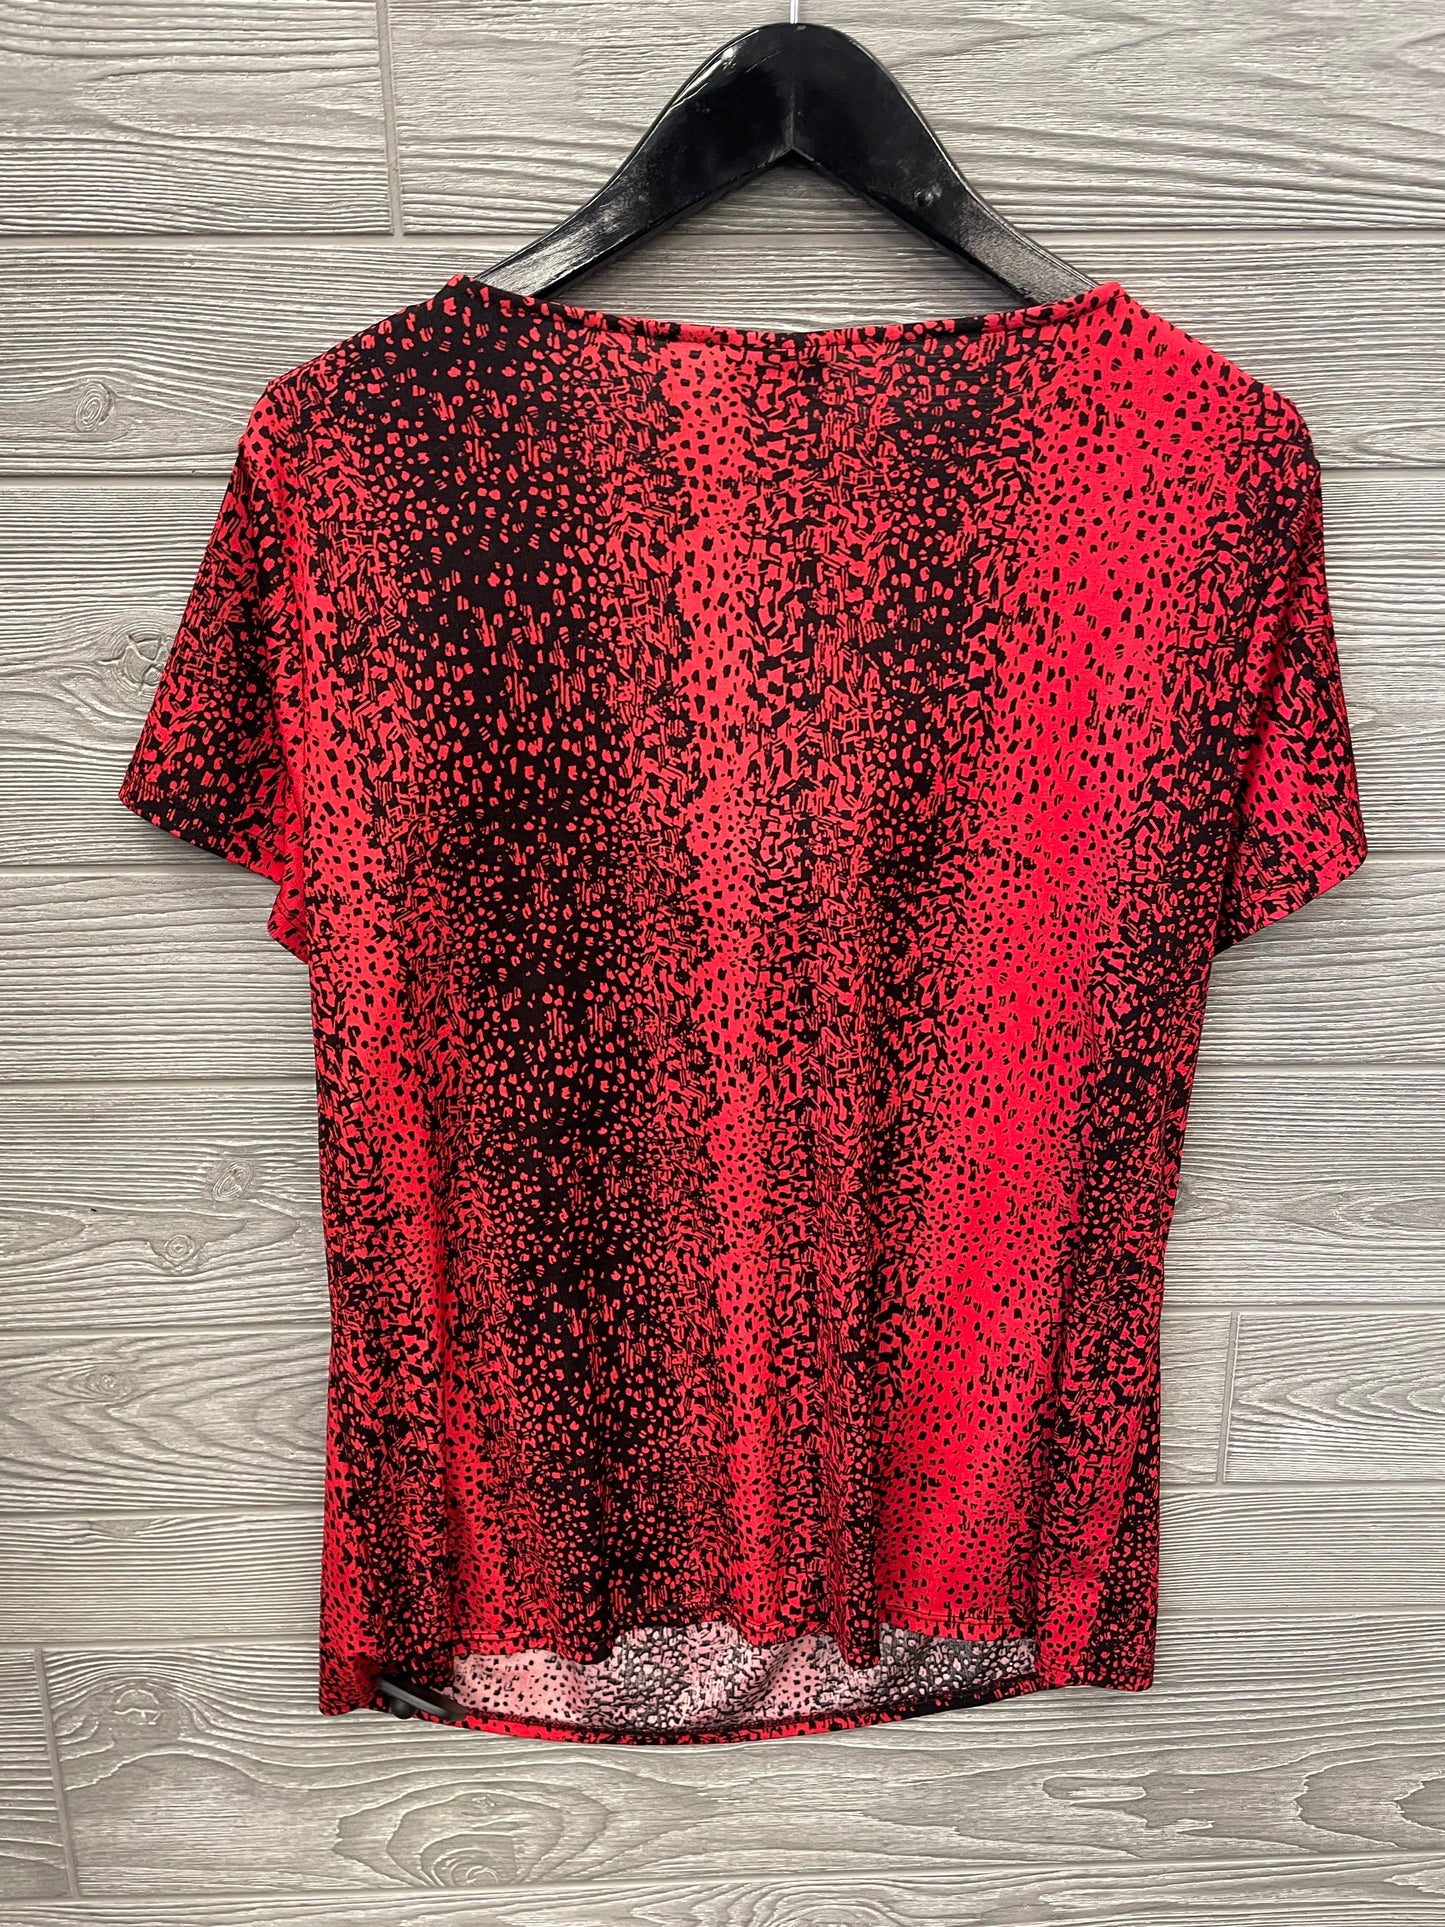 Red Top Short Sleeve Jaclyn Smith, Size L